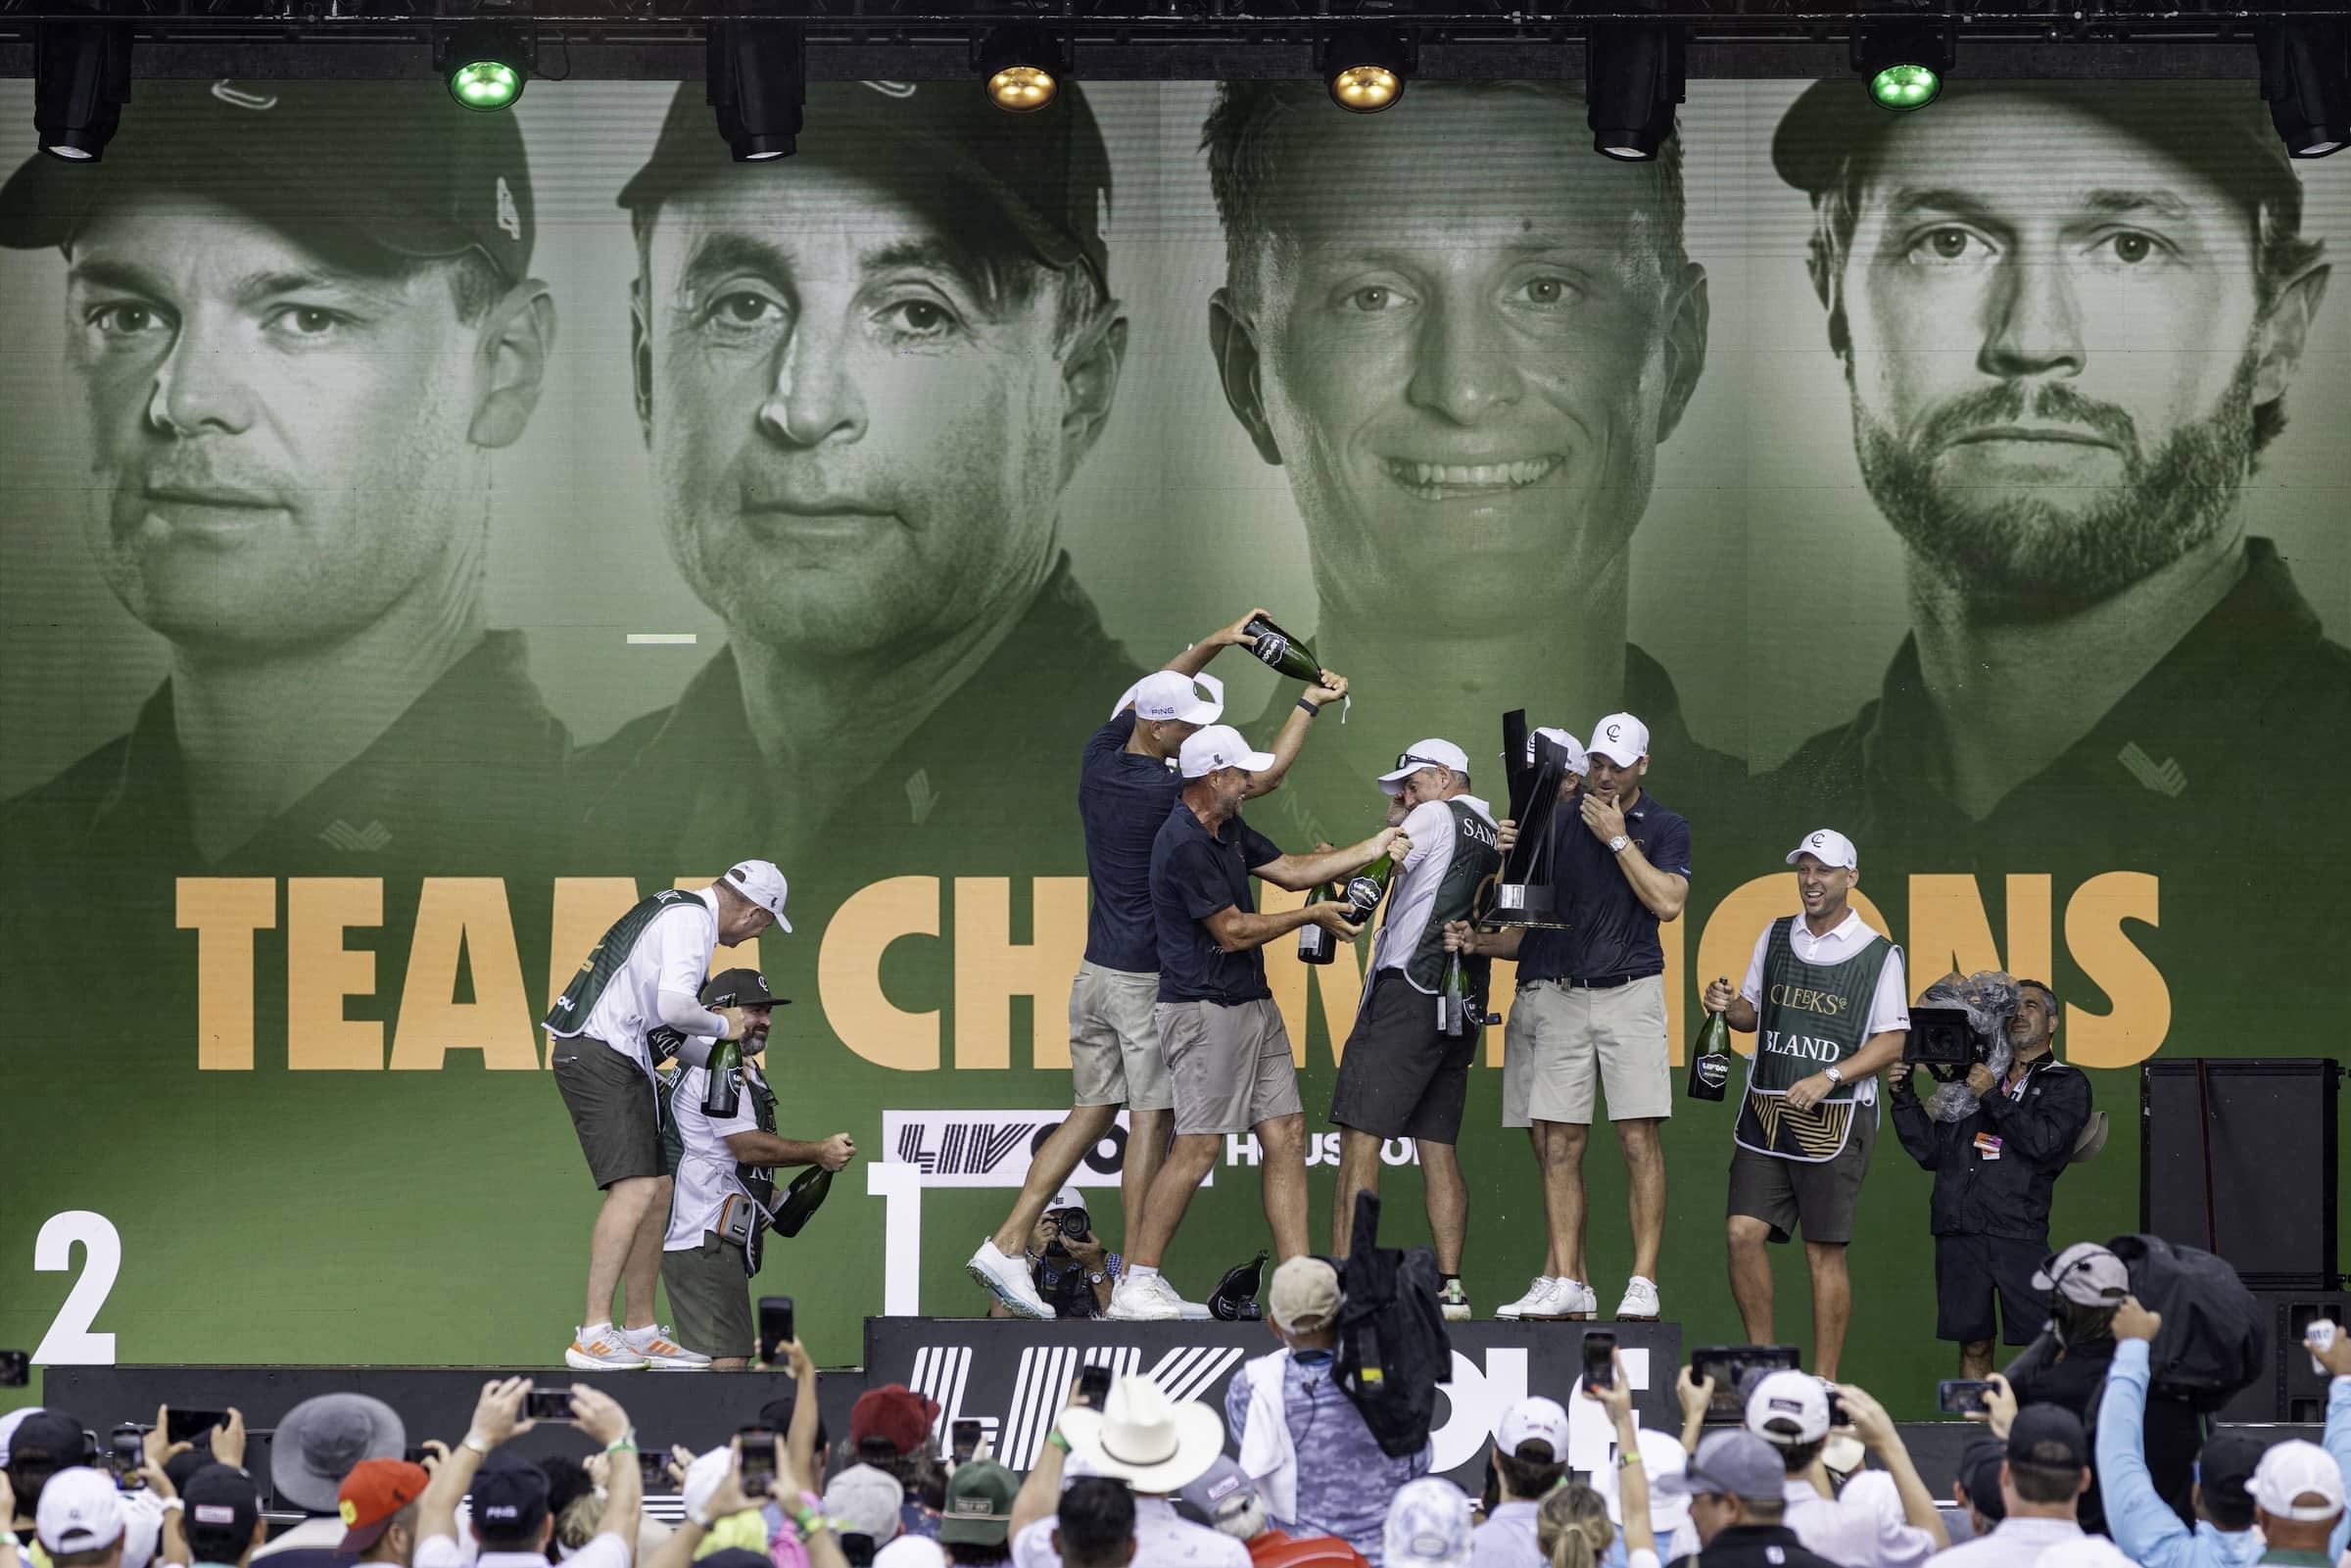 Team Champions Captain Martin Kaymer, Richard Bland, Adrian Meronk and Kalle Samooja of Cleeks GC and caddies Craig Connelly, James Walton, Stuart Beck and John Dempster celebrate onstage